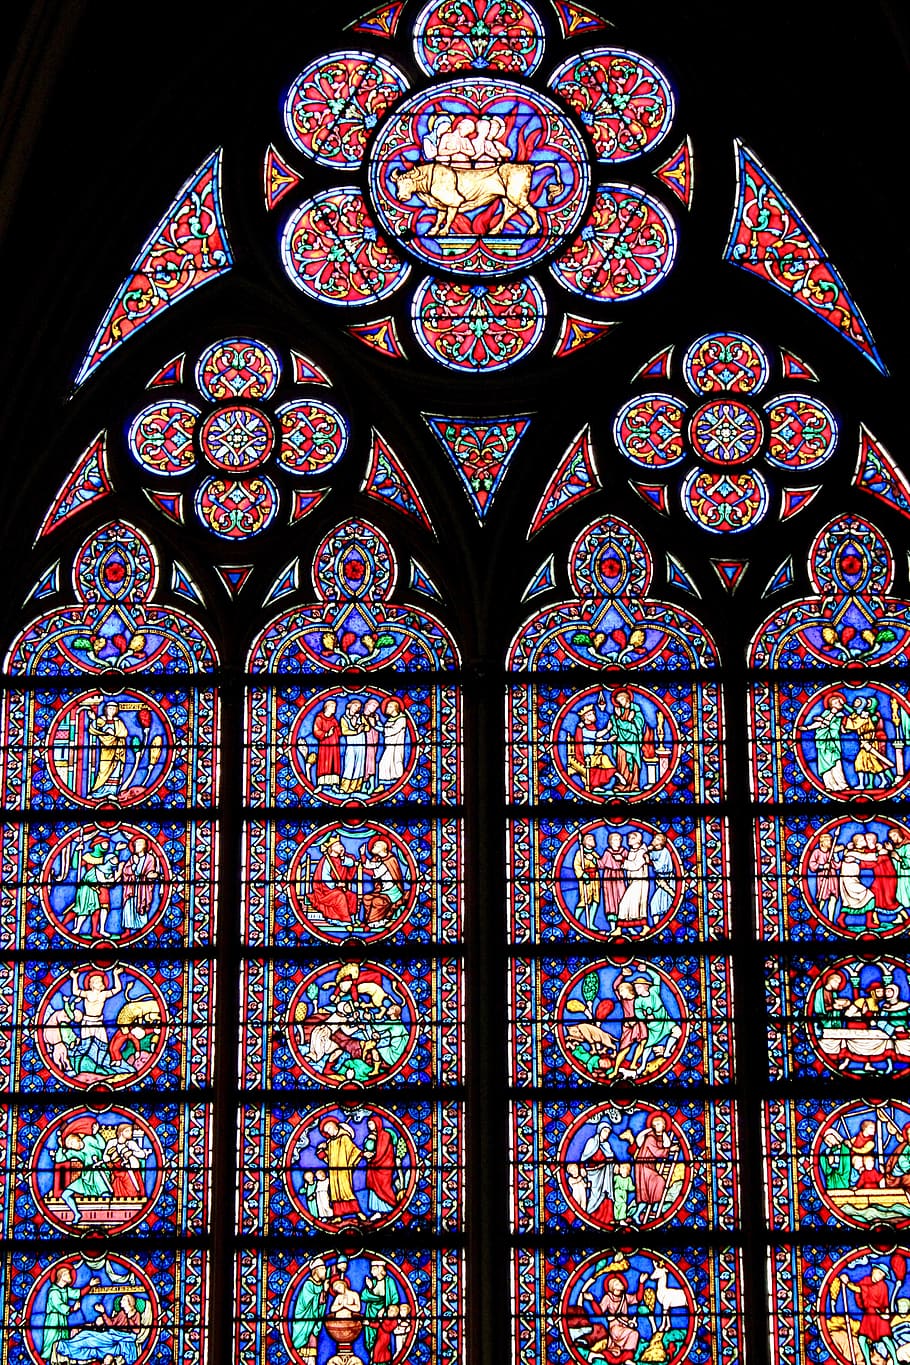 church window, window, notre-dame, religion, architecture, stained glass window, chapel, stained glass, faith, mystical